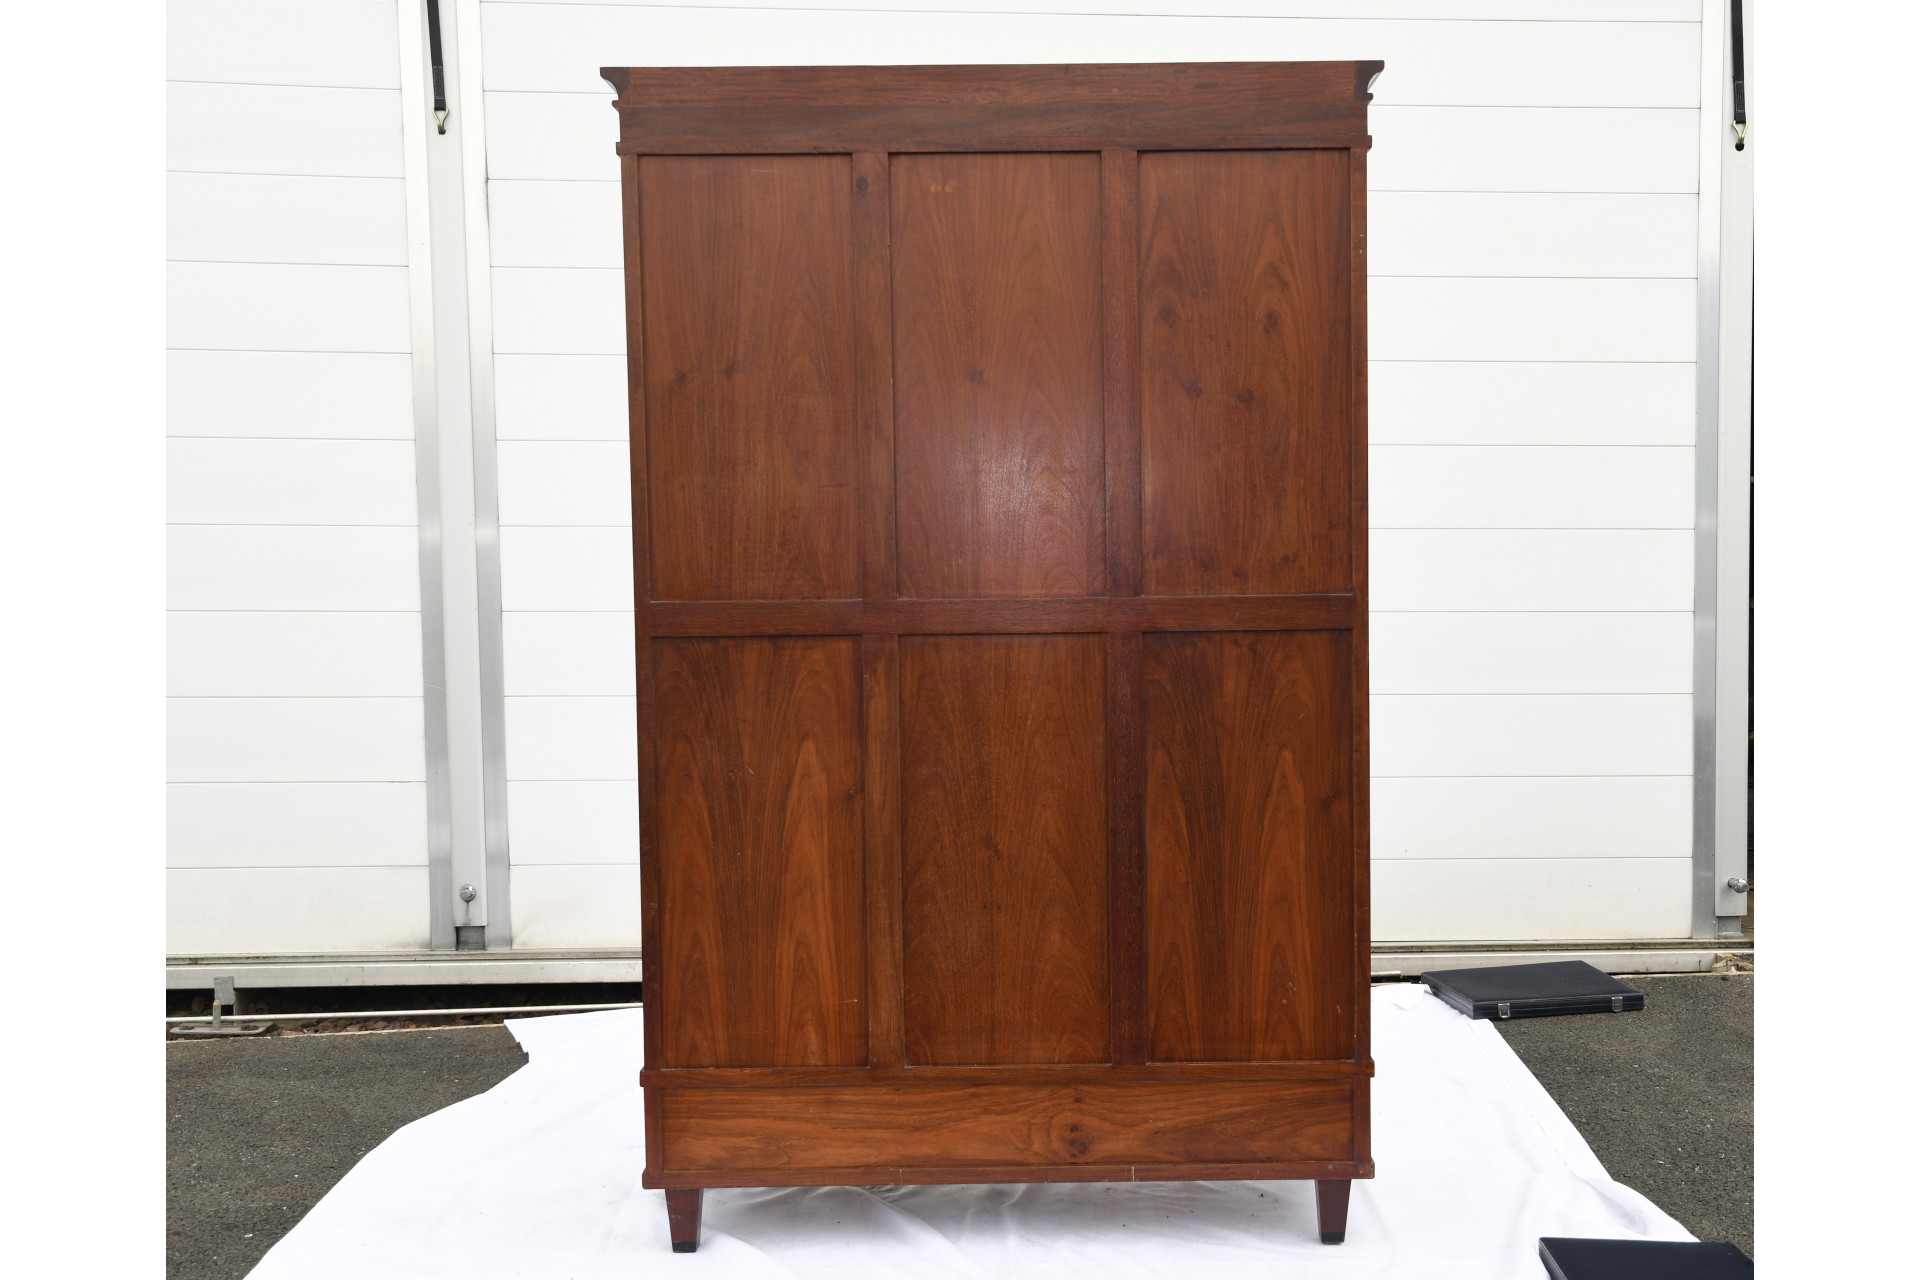 Document Display Cabinet in Rosewood